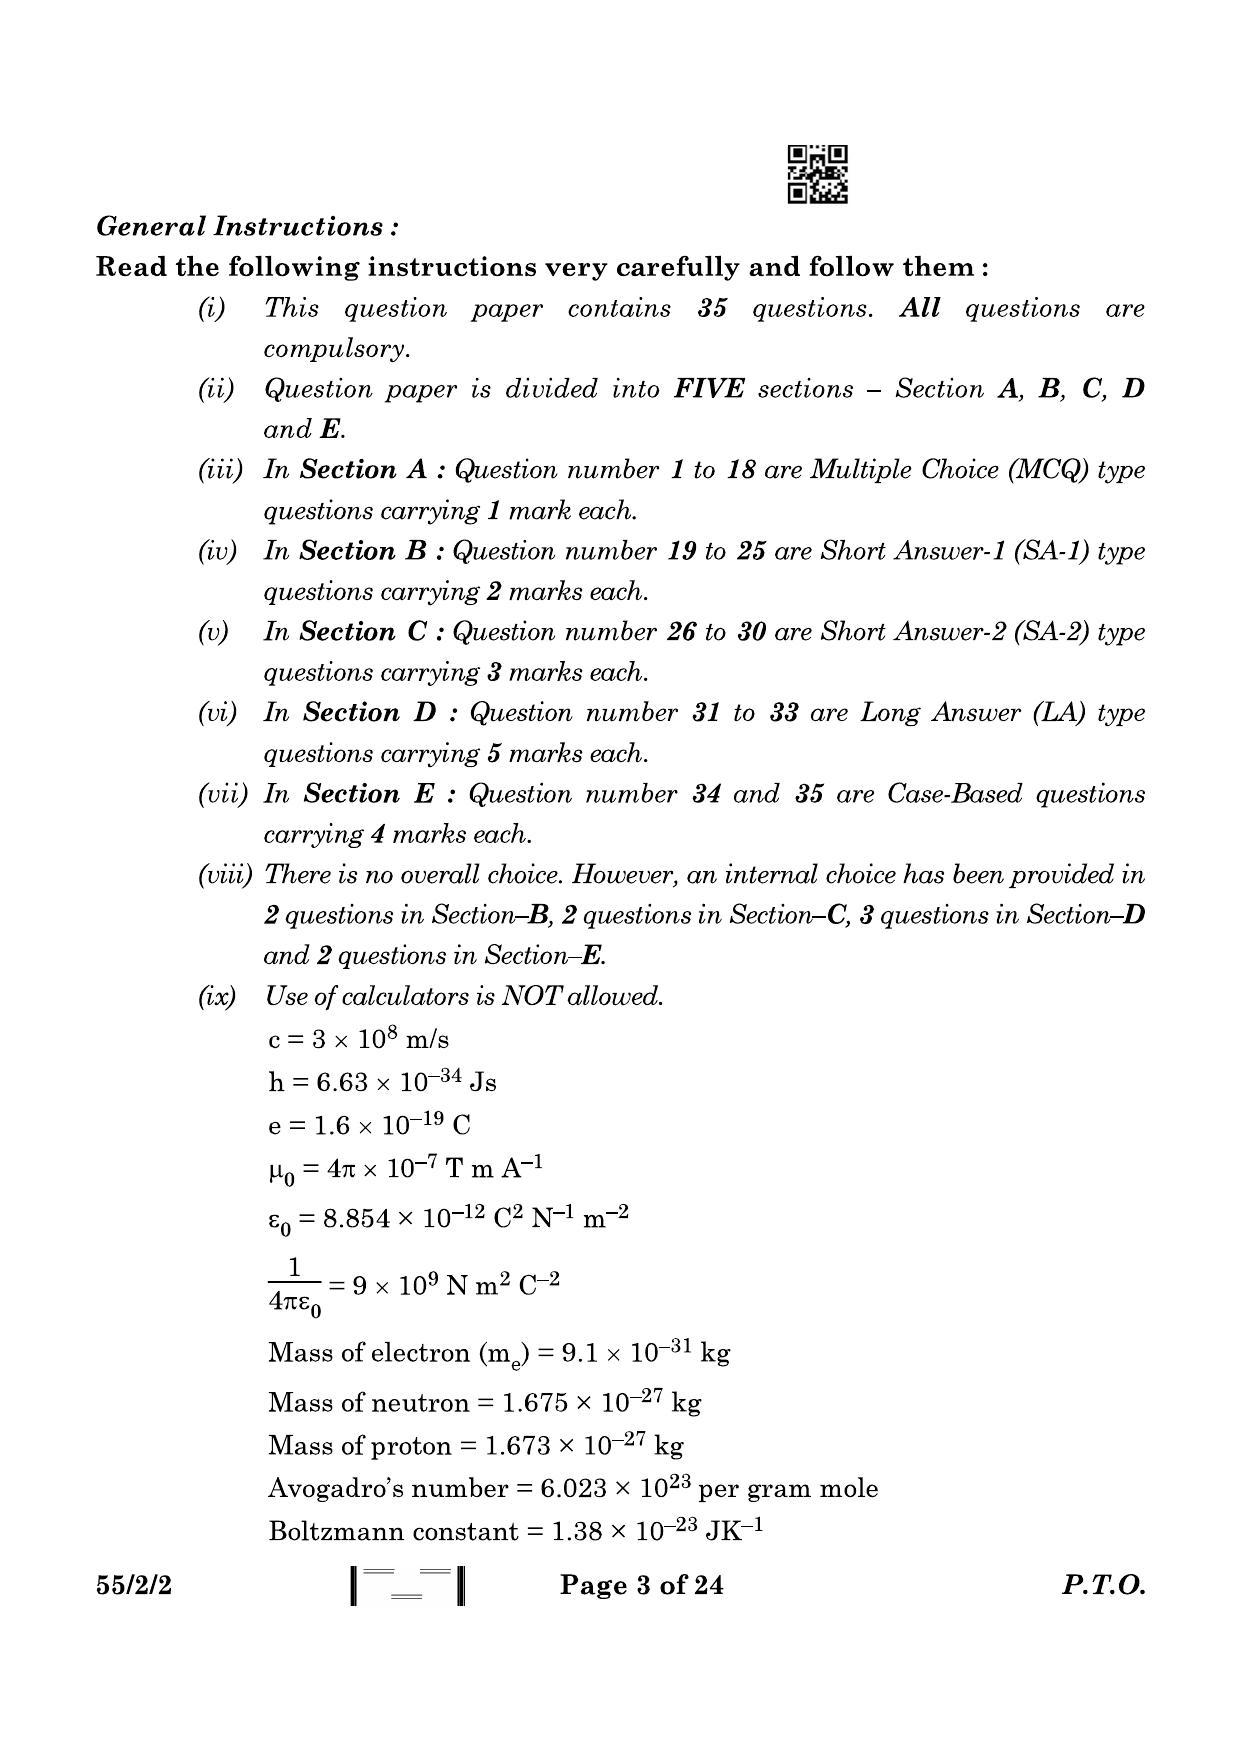 CBSE Class 12 55-2-2 Physics 2023 Question Paper - Page 3